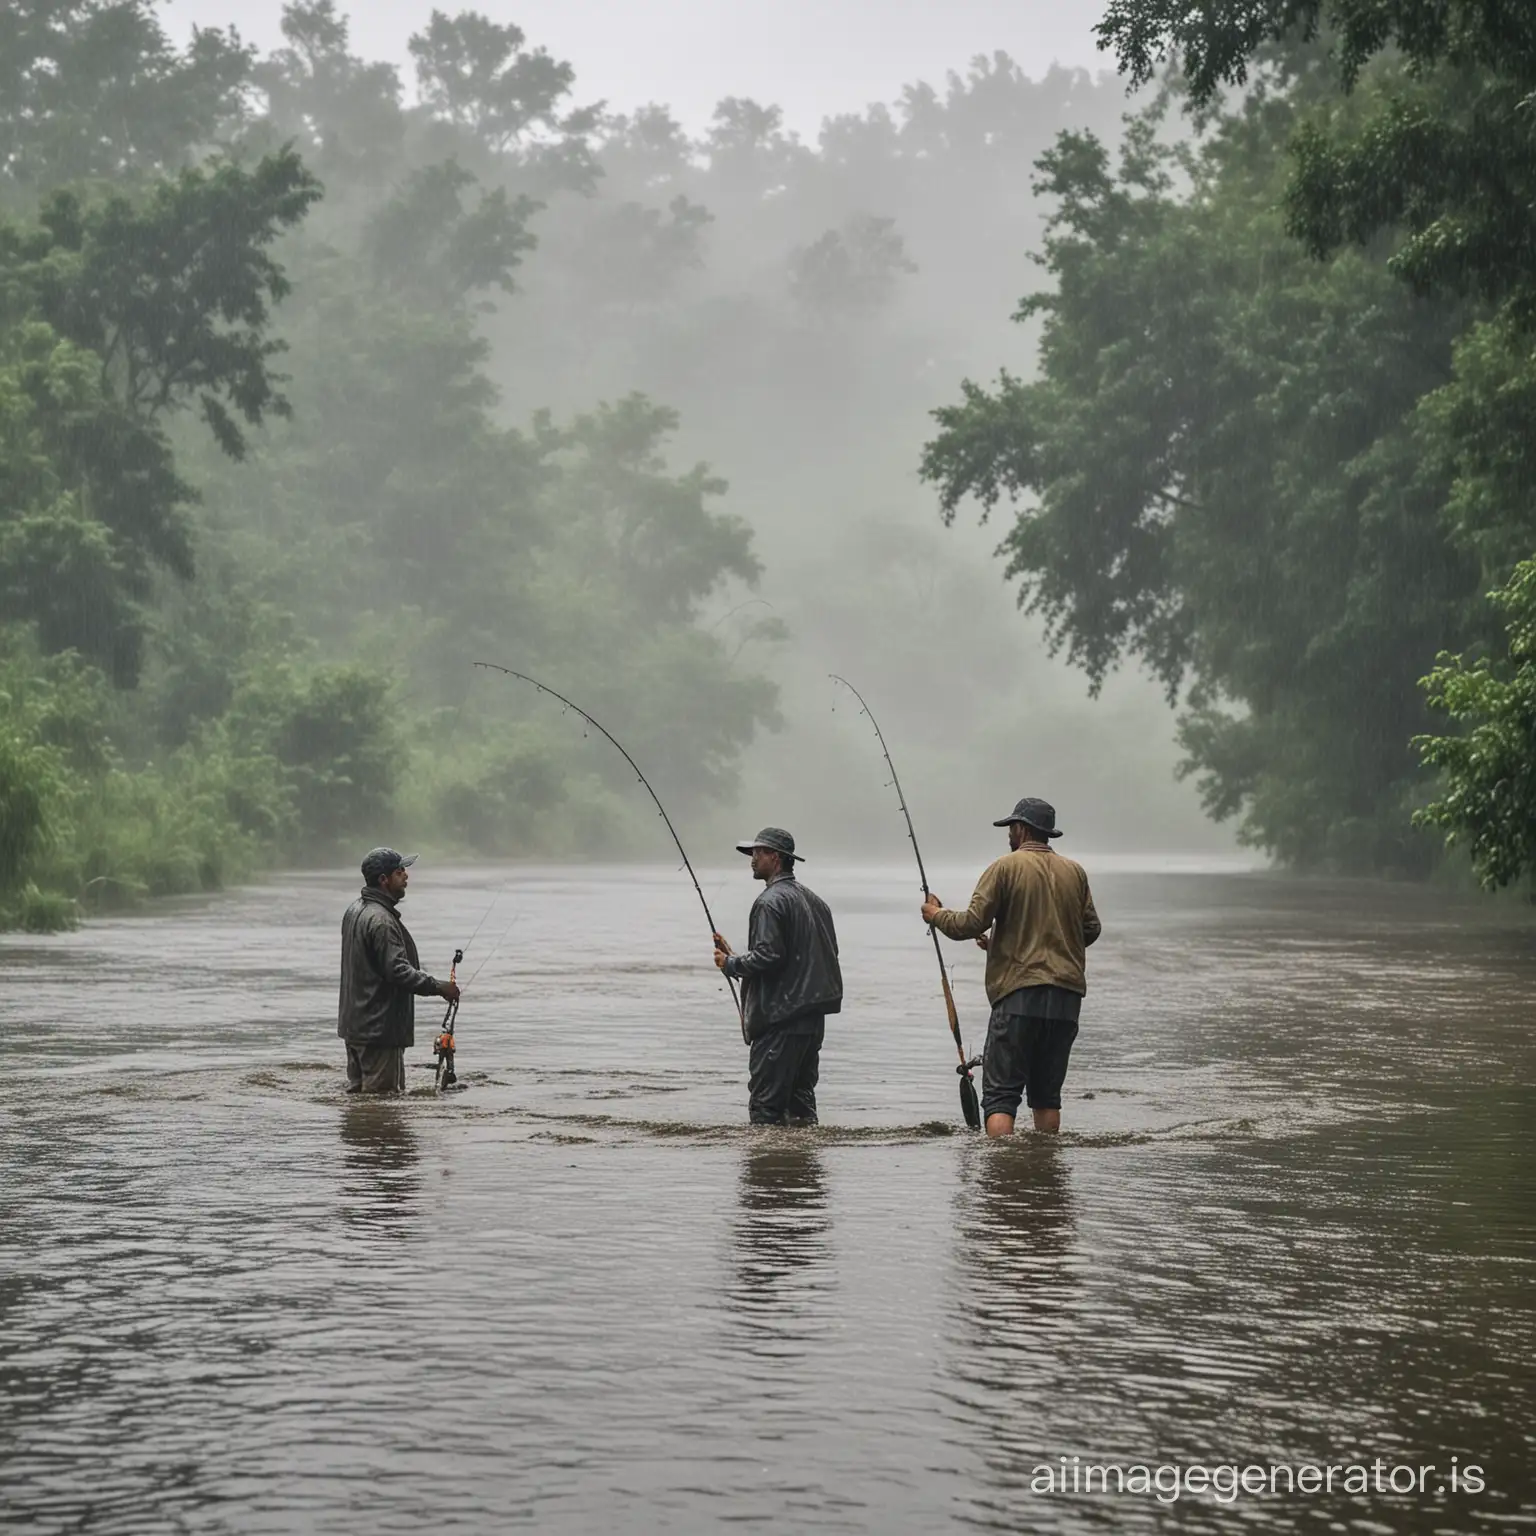 Three-Men-Fishing-in-Rainy-River-Scene-with-Stroked-Background